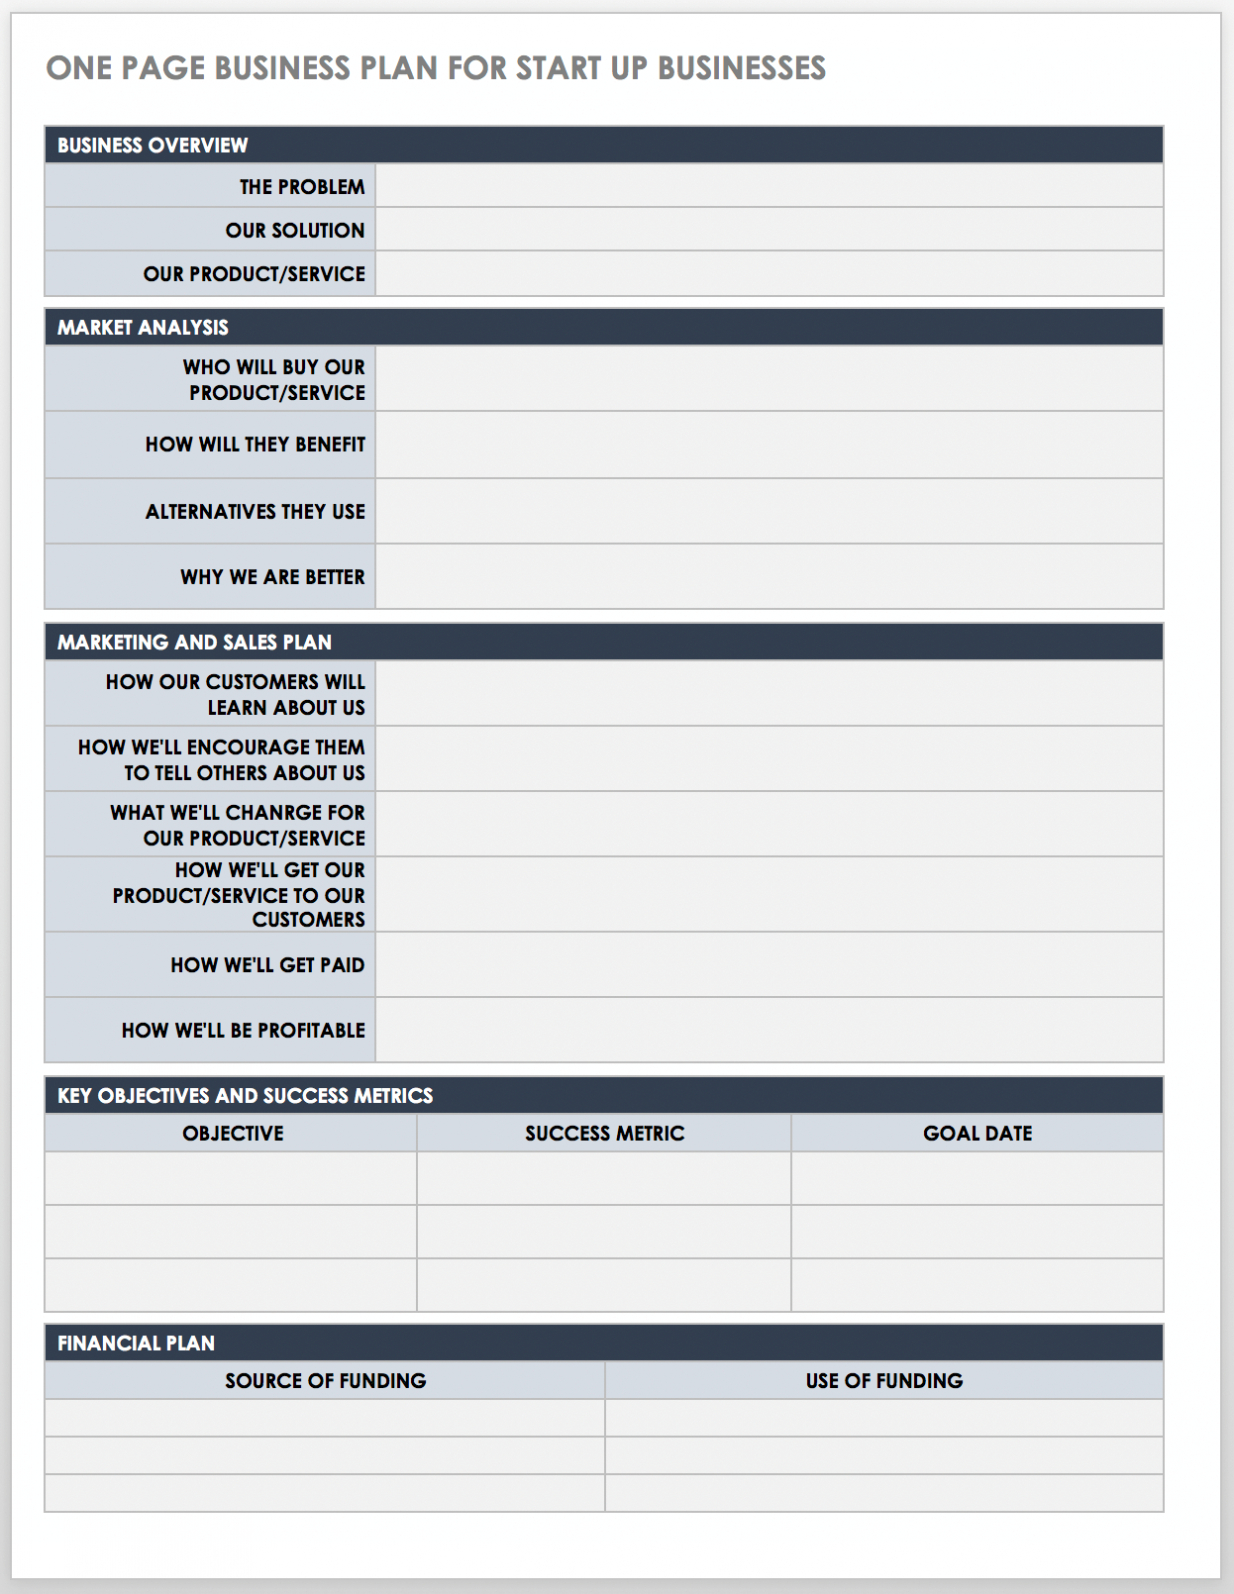 Free Startup Business Plan Templates | Smartsheet intended for Business Plan For A Startup Business Template